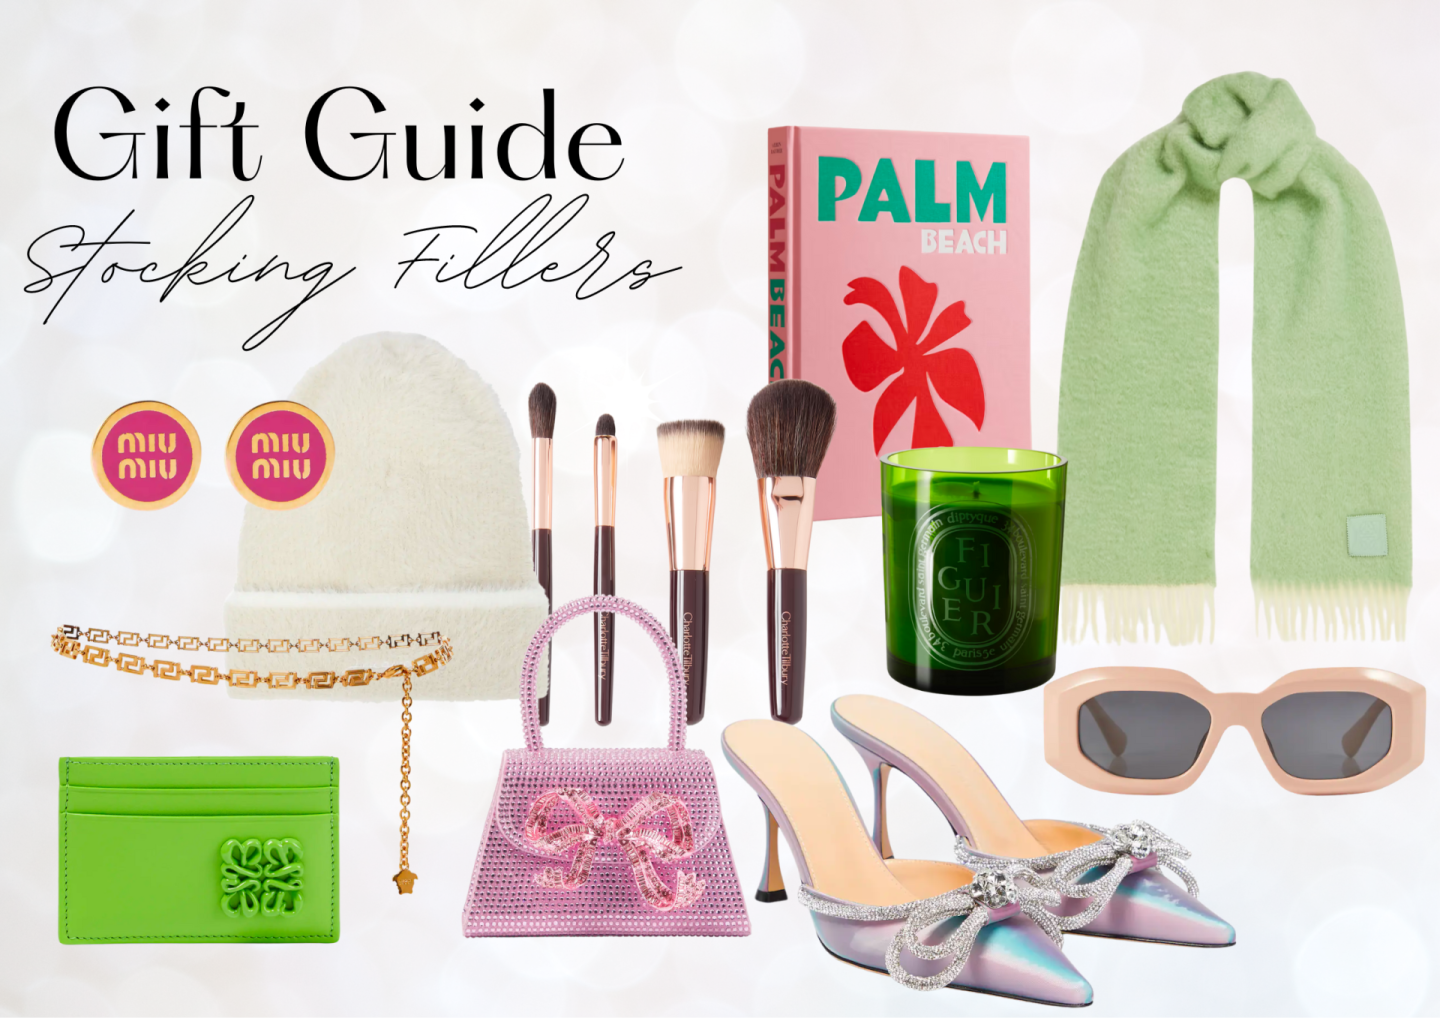 GIFT GUIDE 2022 | STOCKING FILLERS